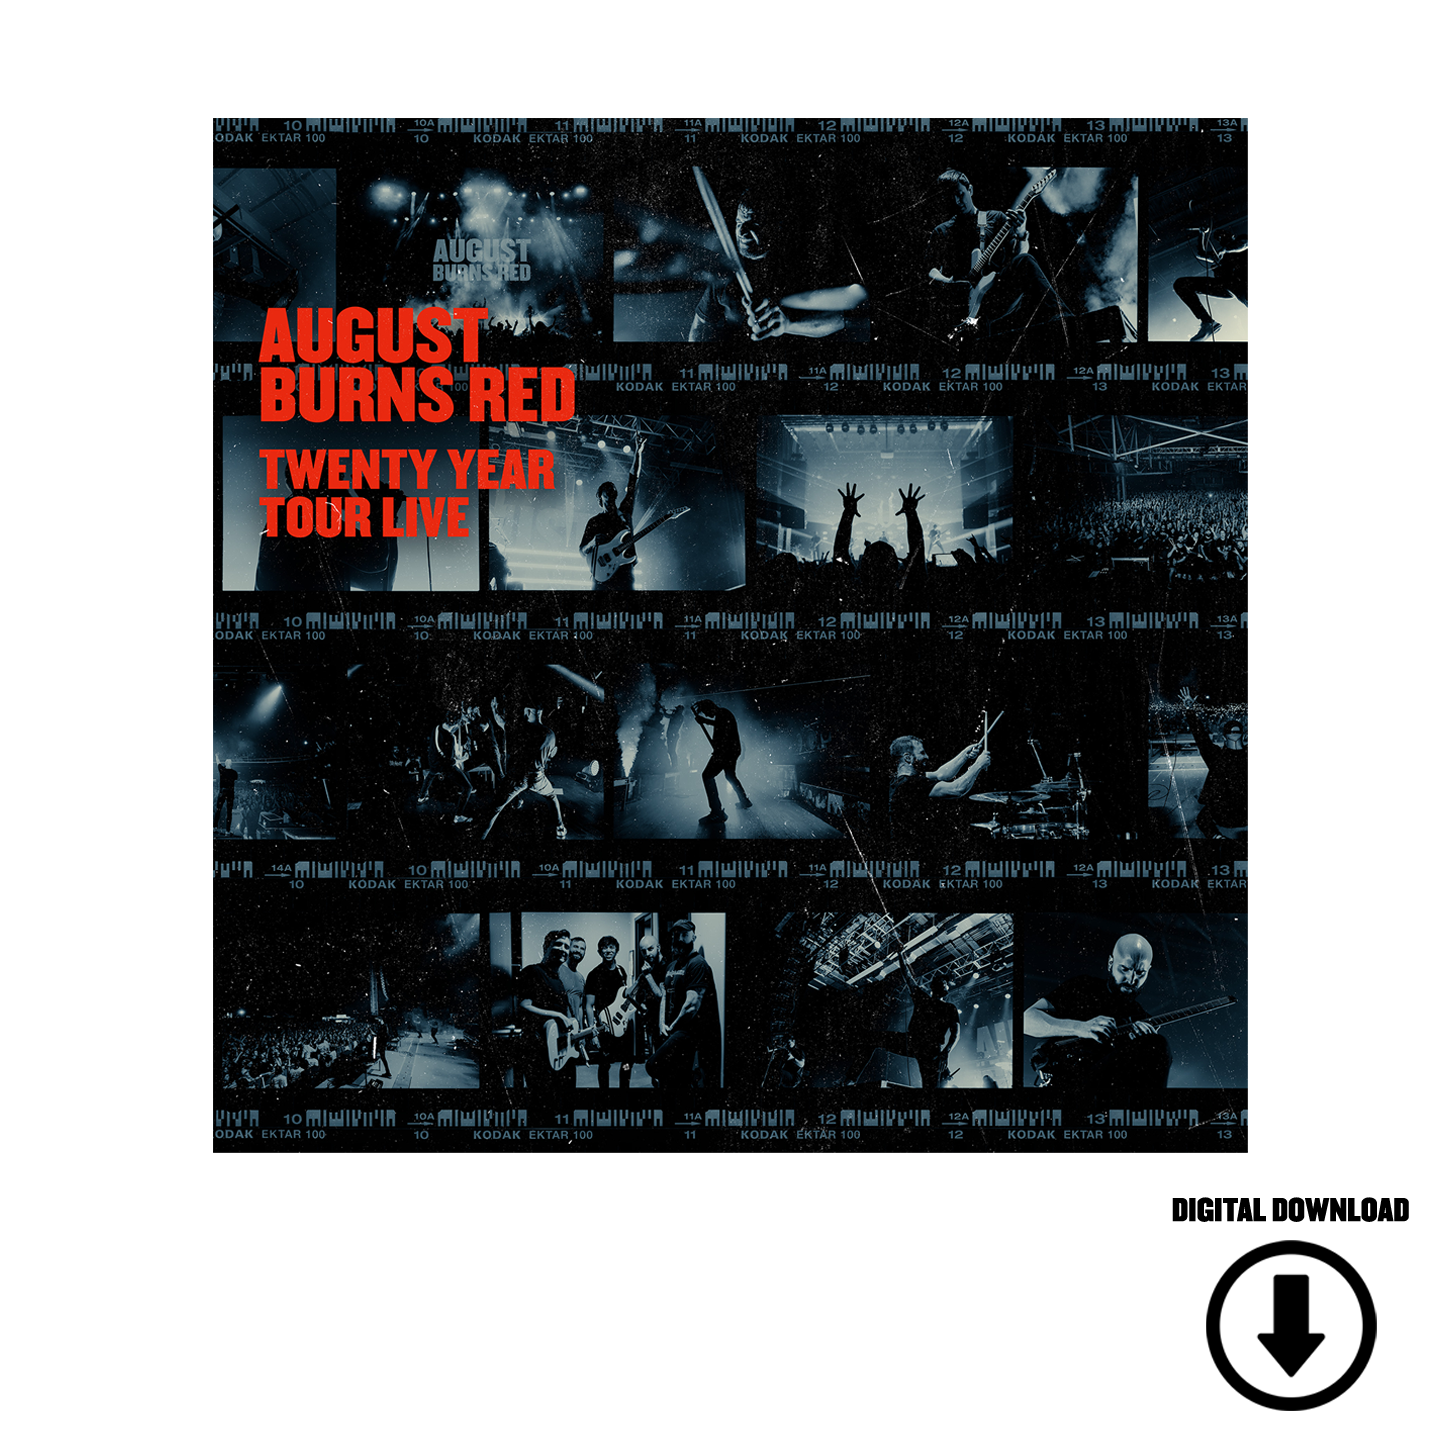 20 Year Tour Live Album Digital Download – August Burns Red Official Store